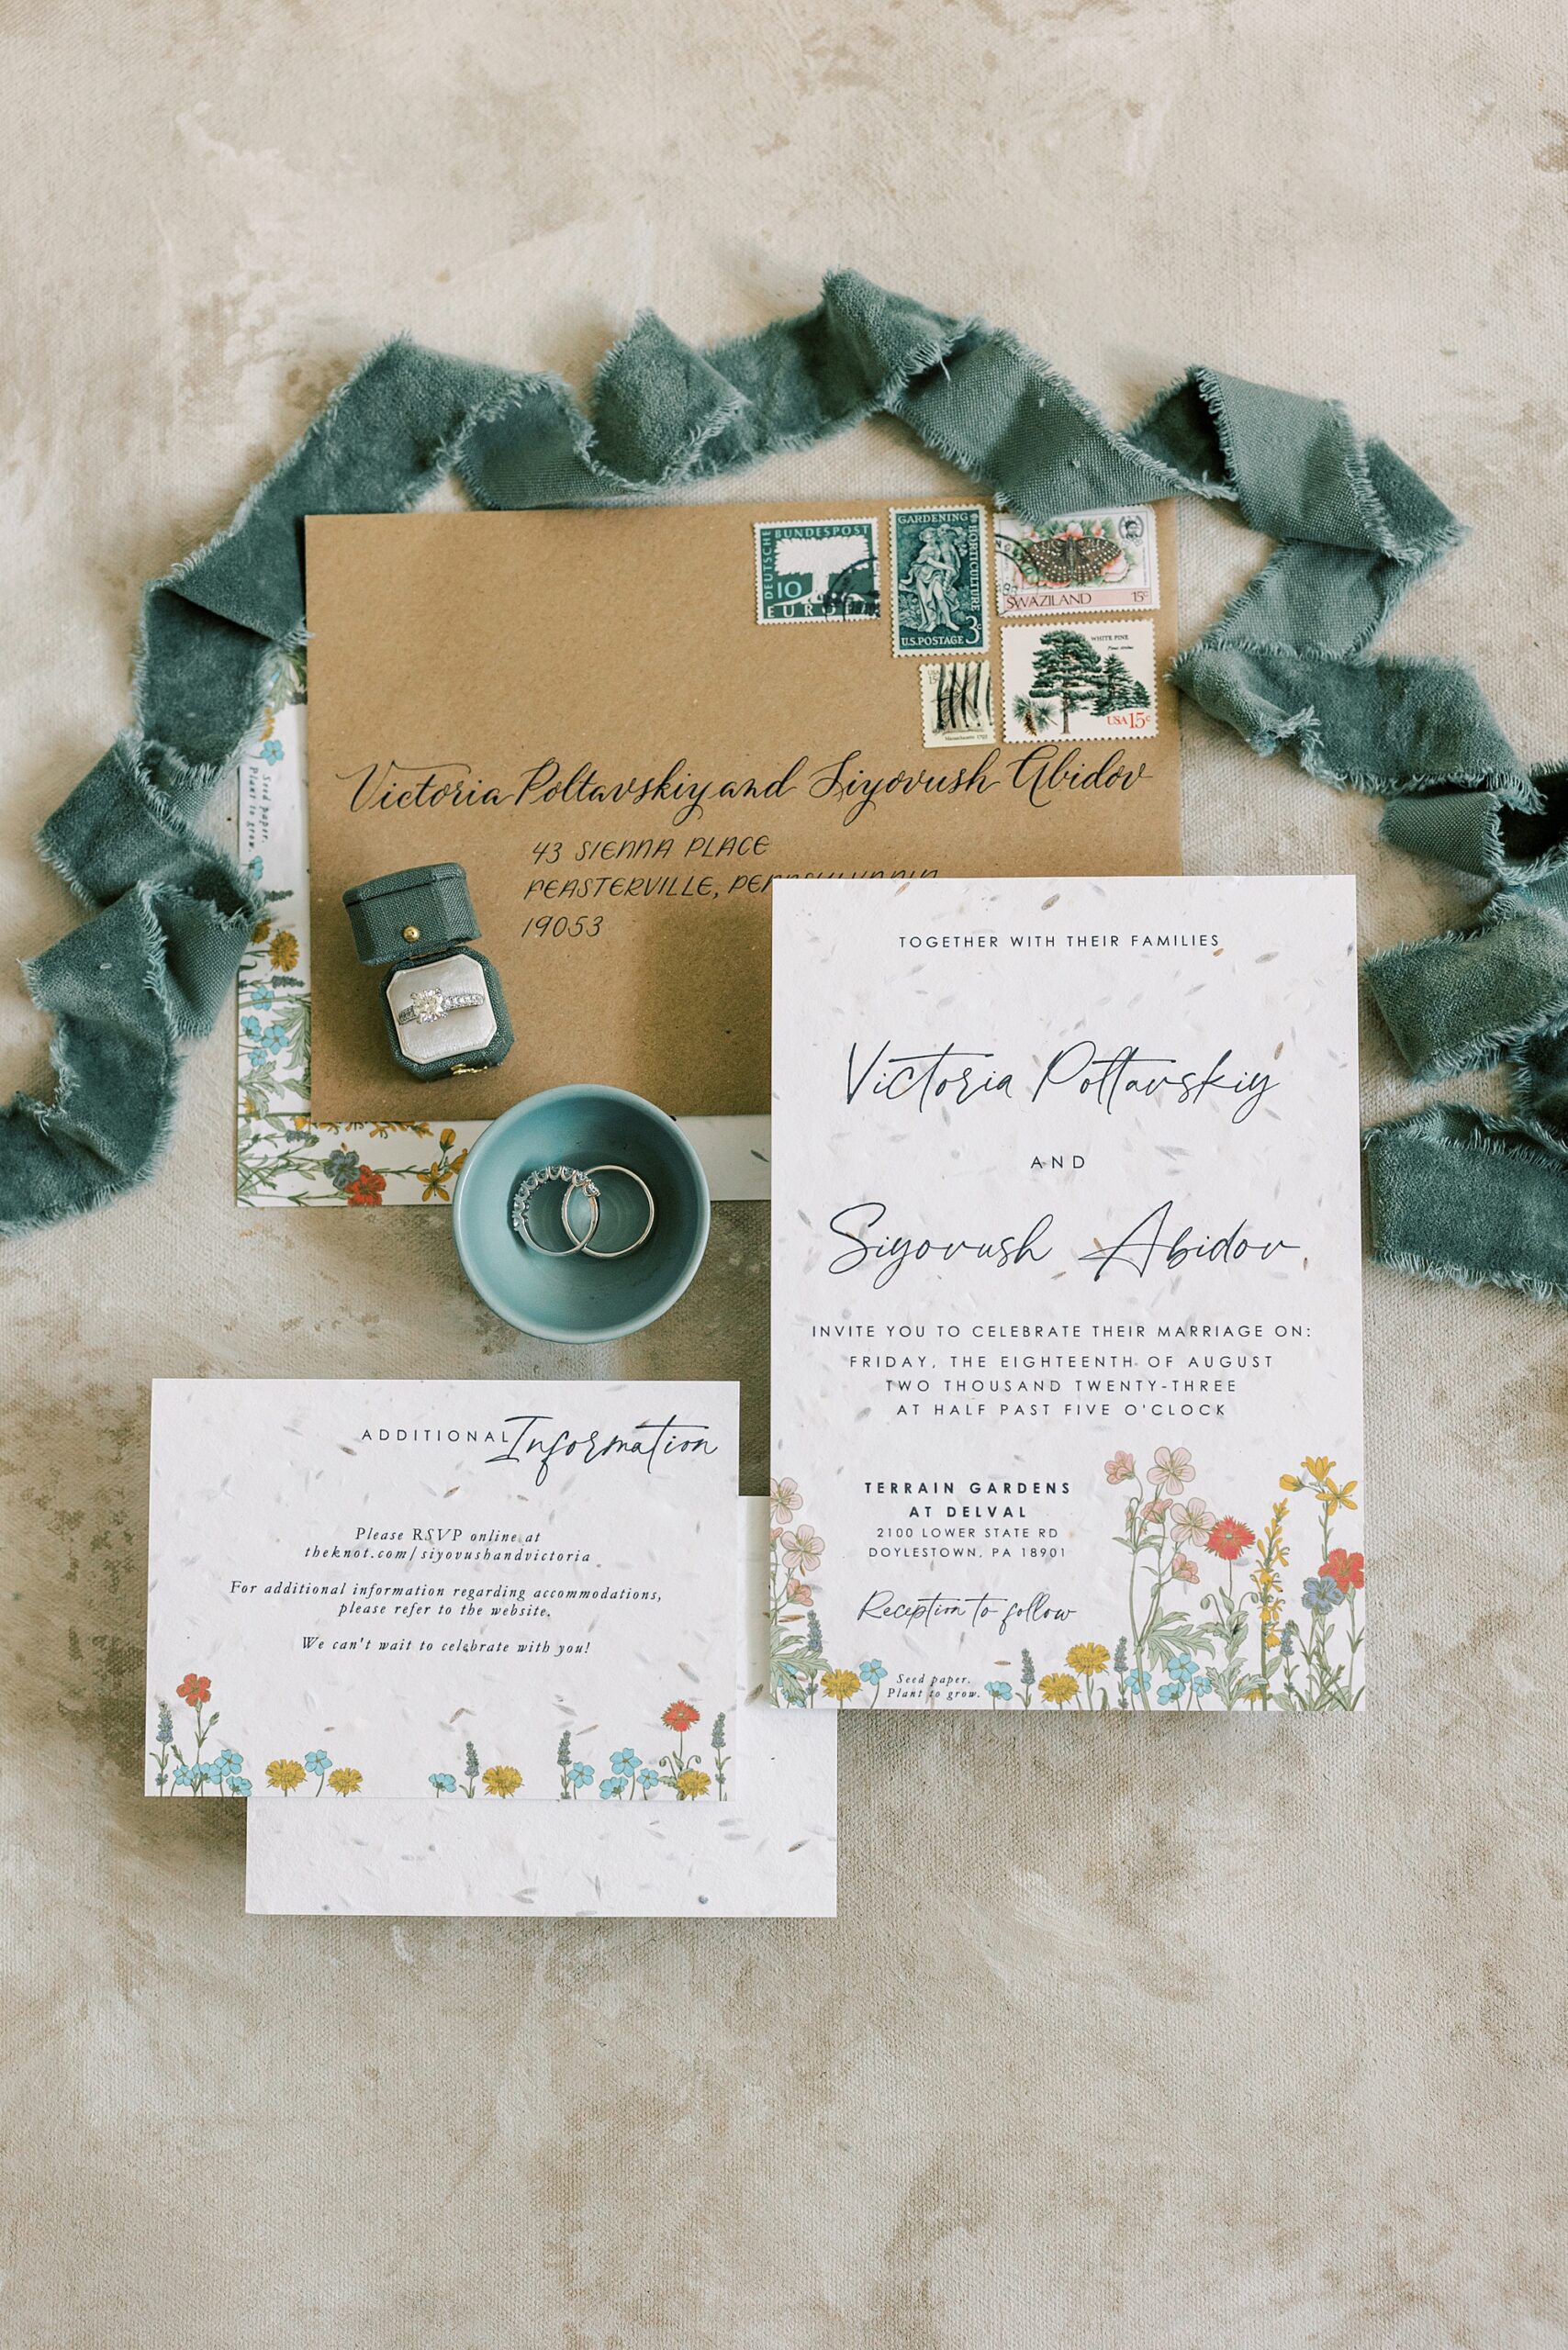 invitation suite with wildflower accents and blue ribbon around top